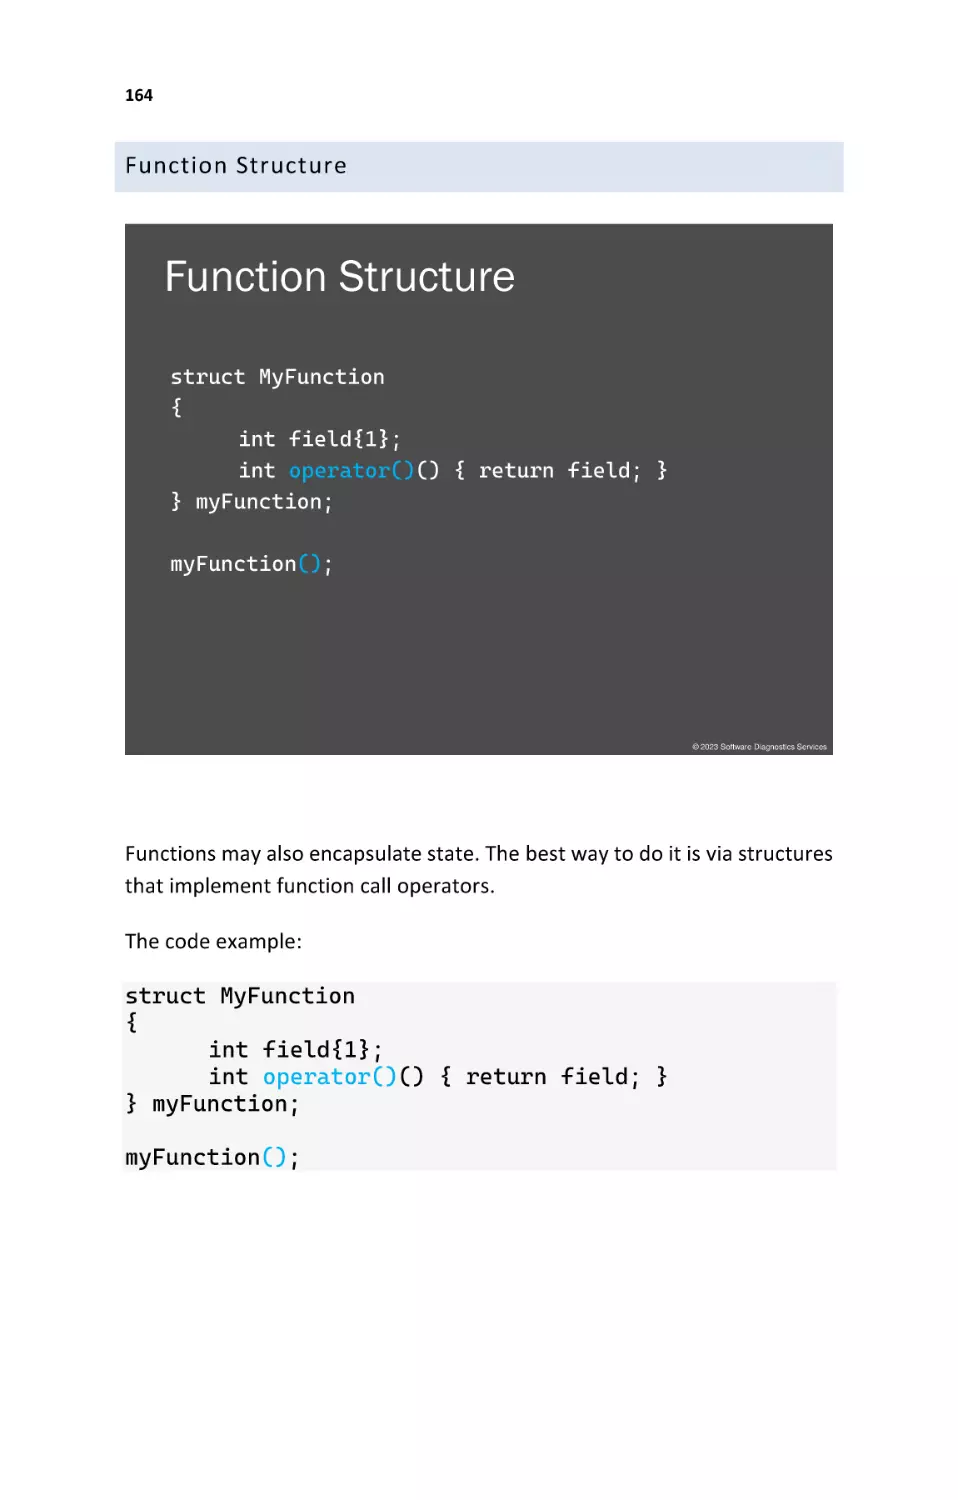 Function Structure